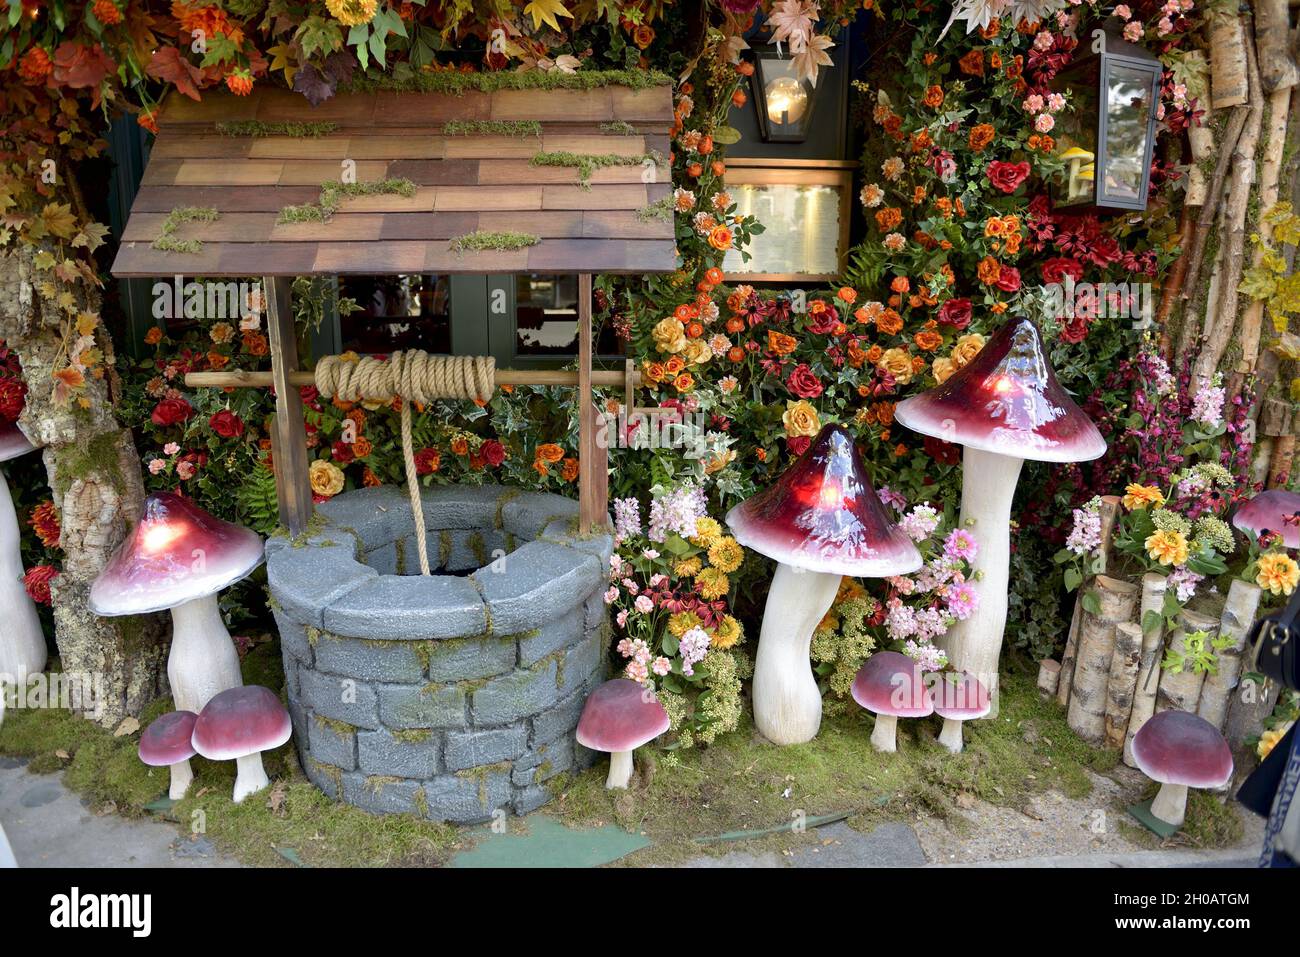 Wishing well and giant mushrooms outside a shop in the King's Road during Chelsea in Bloom annual floral art show and flower shower in the shops and s Stock Photo